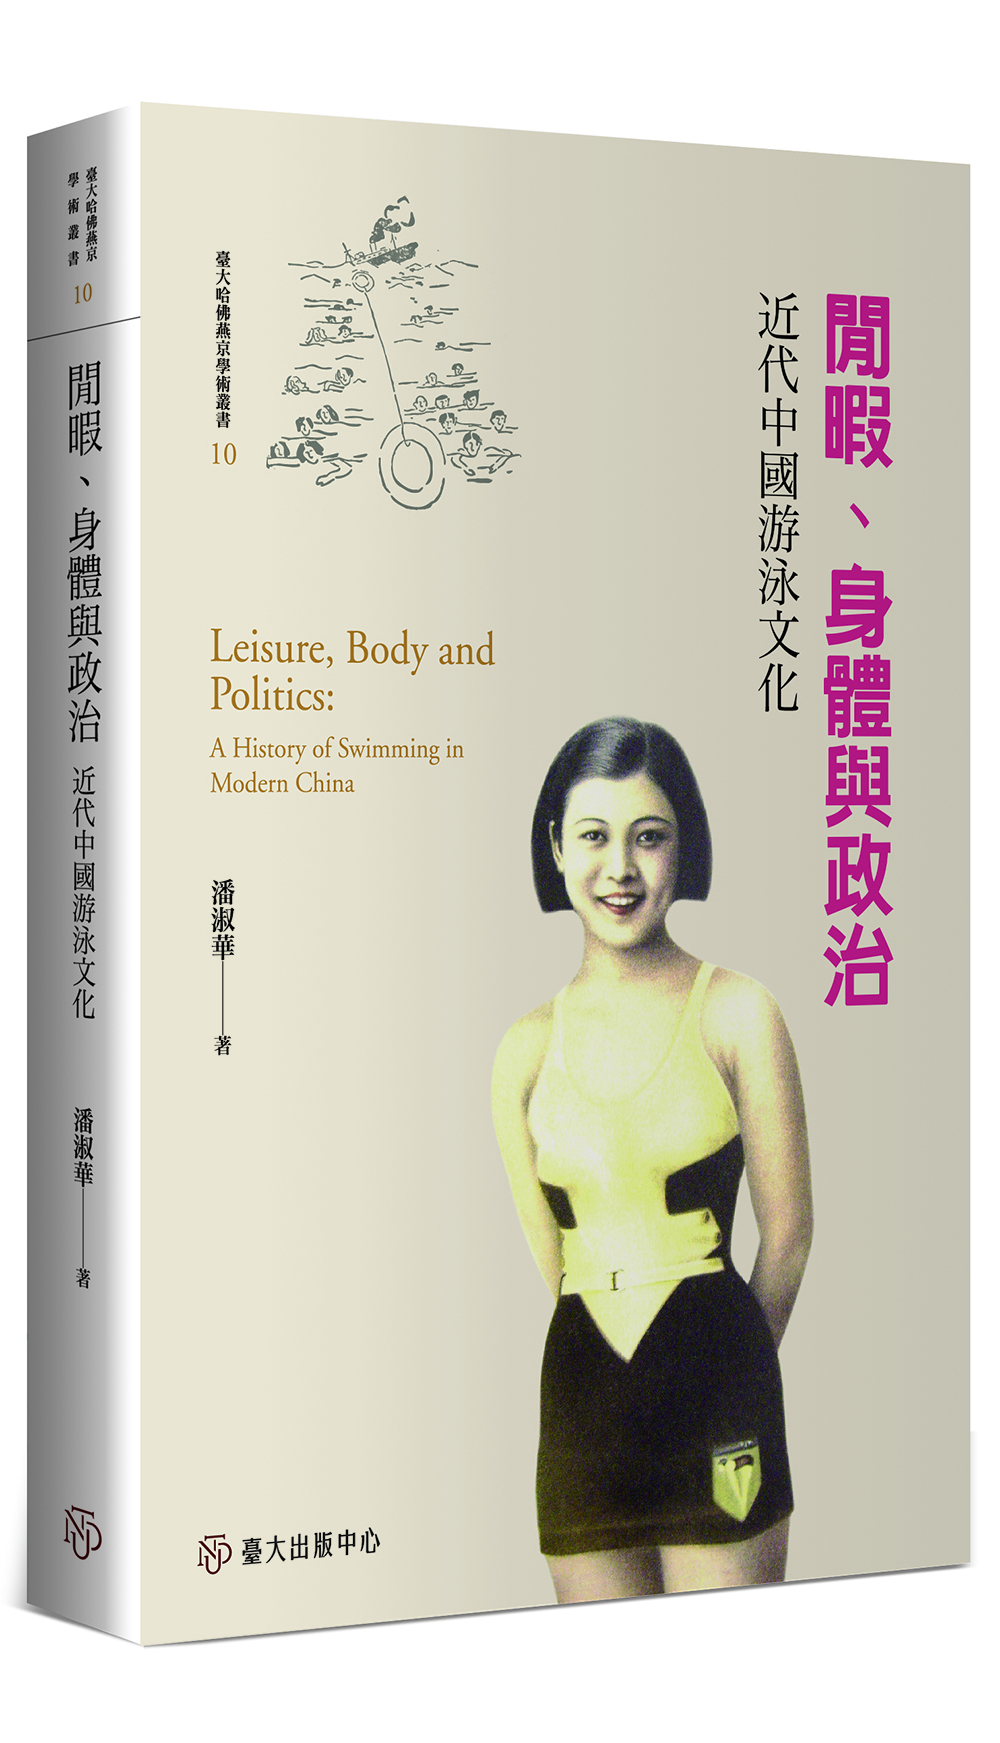 Leisure, Body and Politics: A History of Swimming in Modern China